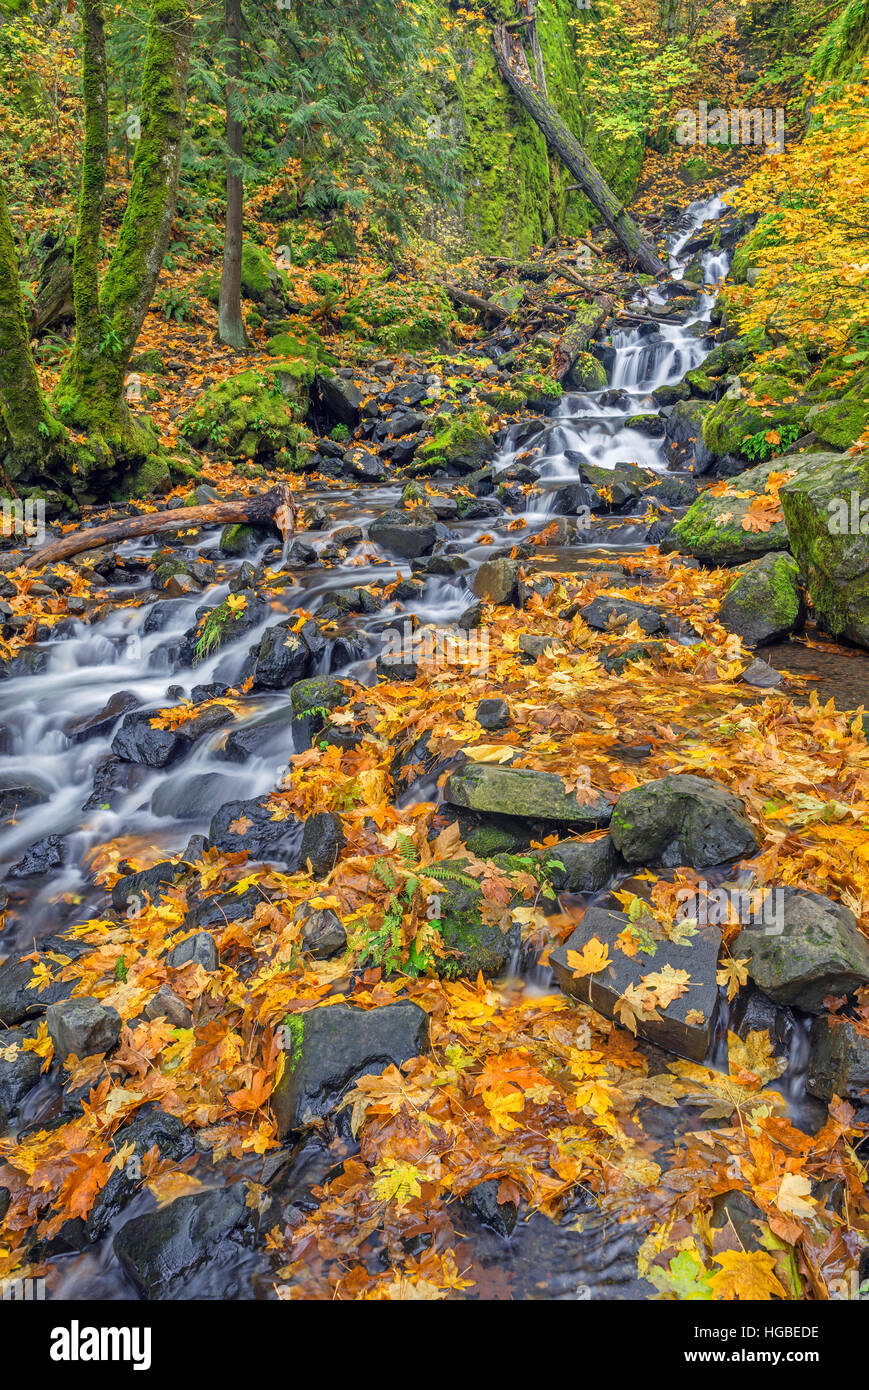 USA, Oregon, Columbia River Gorge National Scenic Area, Starvation Creek in autumn with fallen maple leaves, rocks and moss. Stock Photo